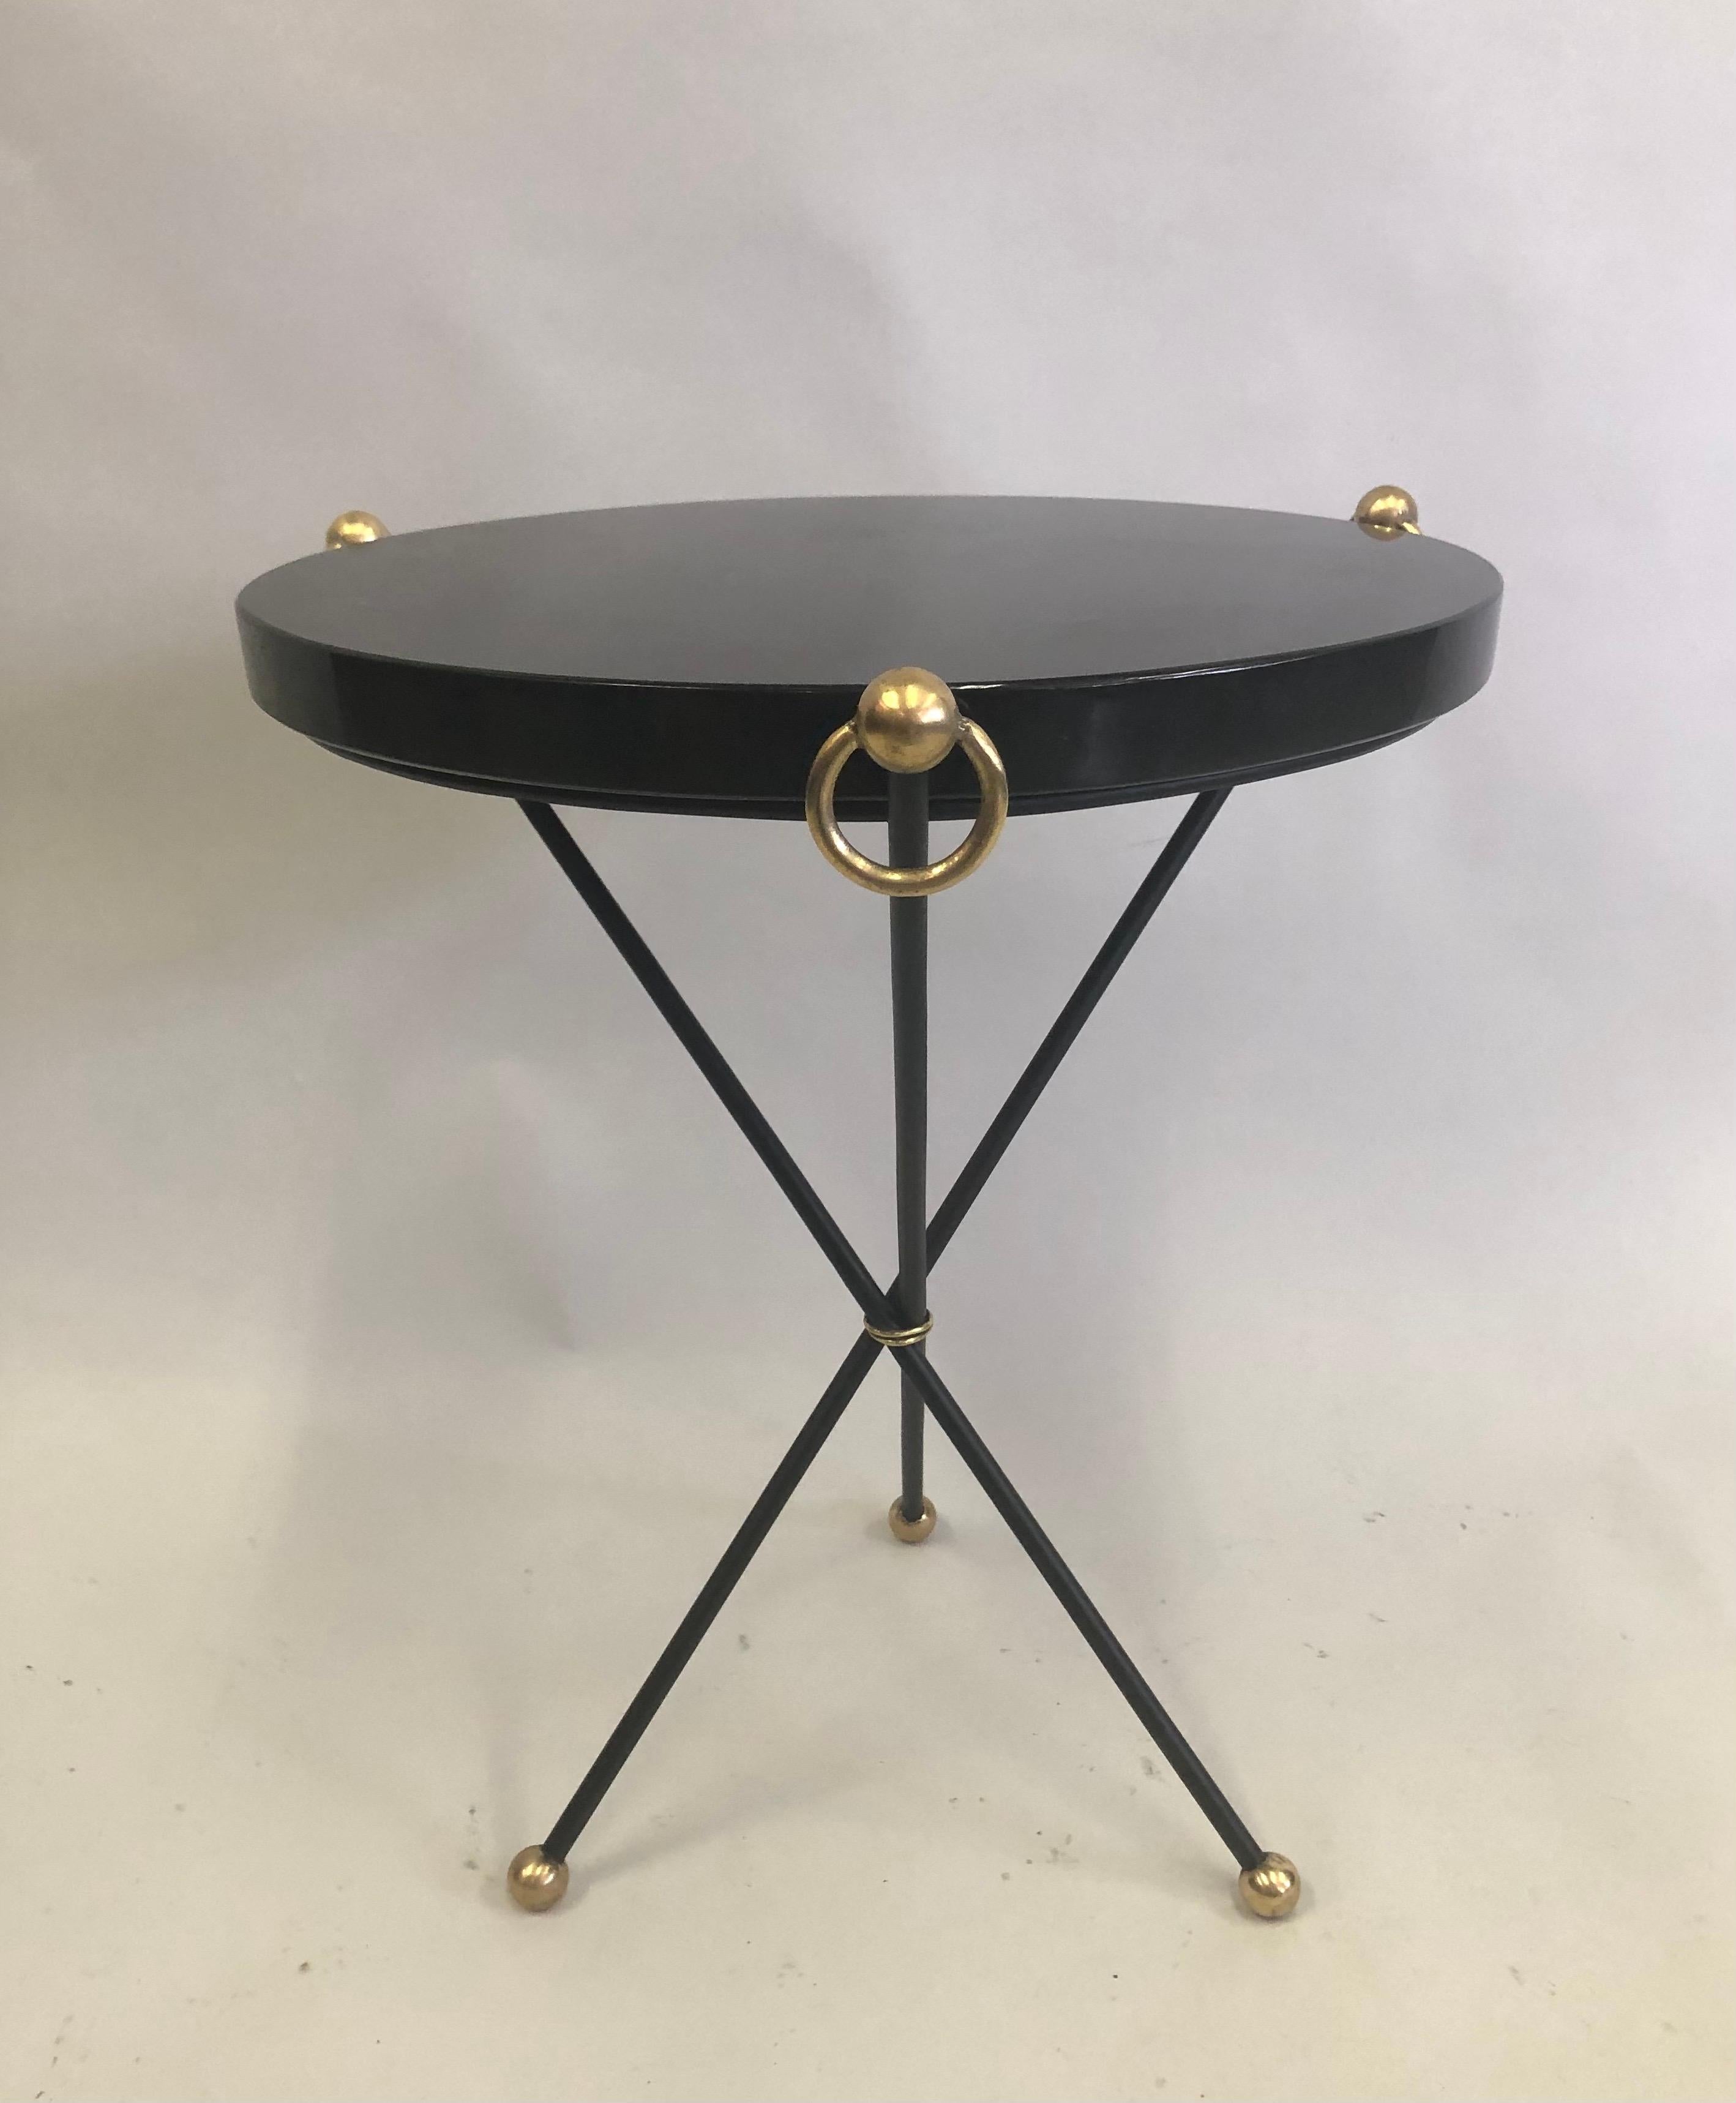 20th Century French Modern Neoclassical Iron, Brass & Stone Side Table Attr. to Jacques Adnet For Sale